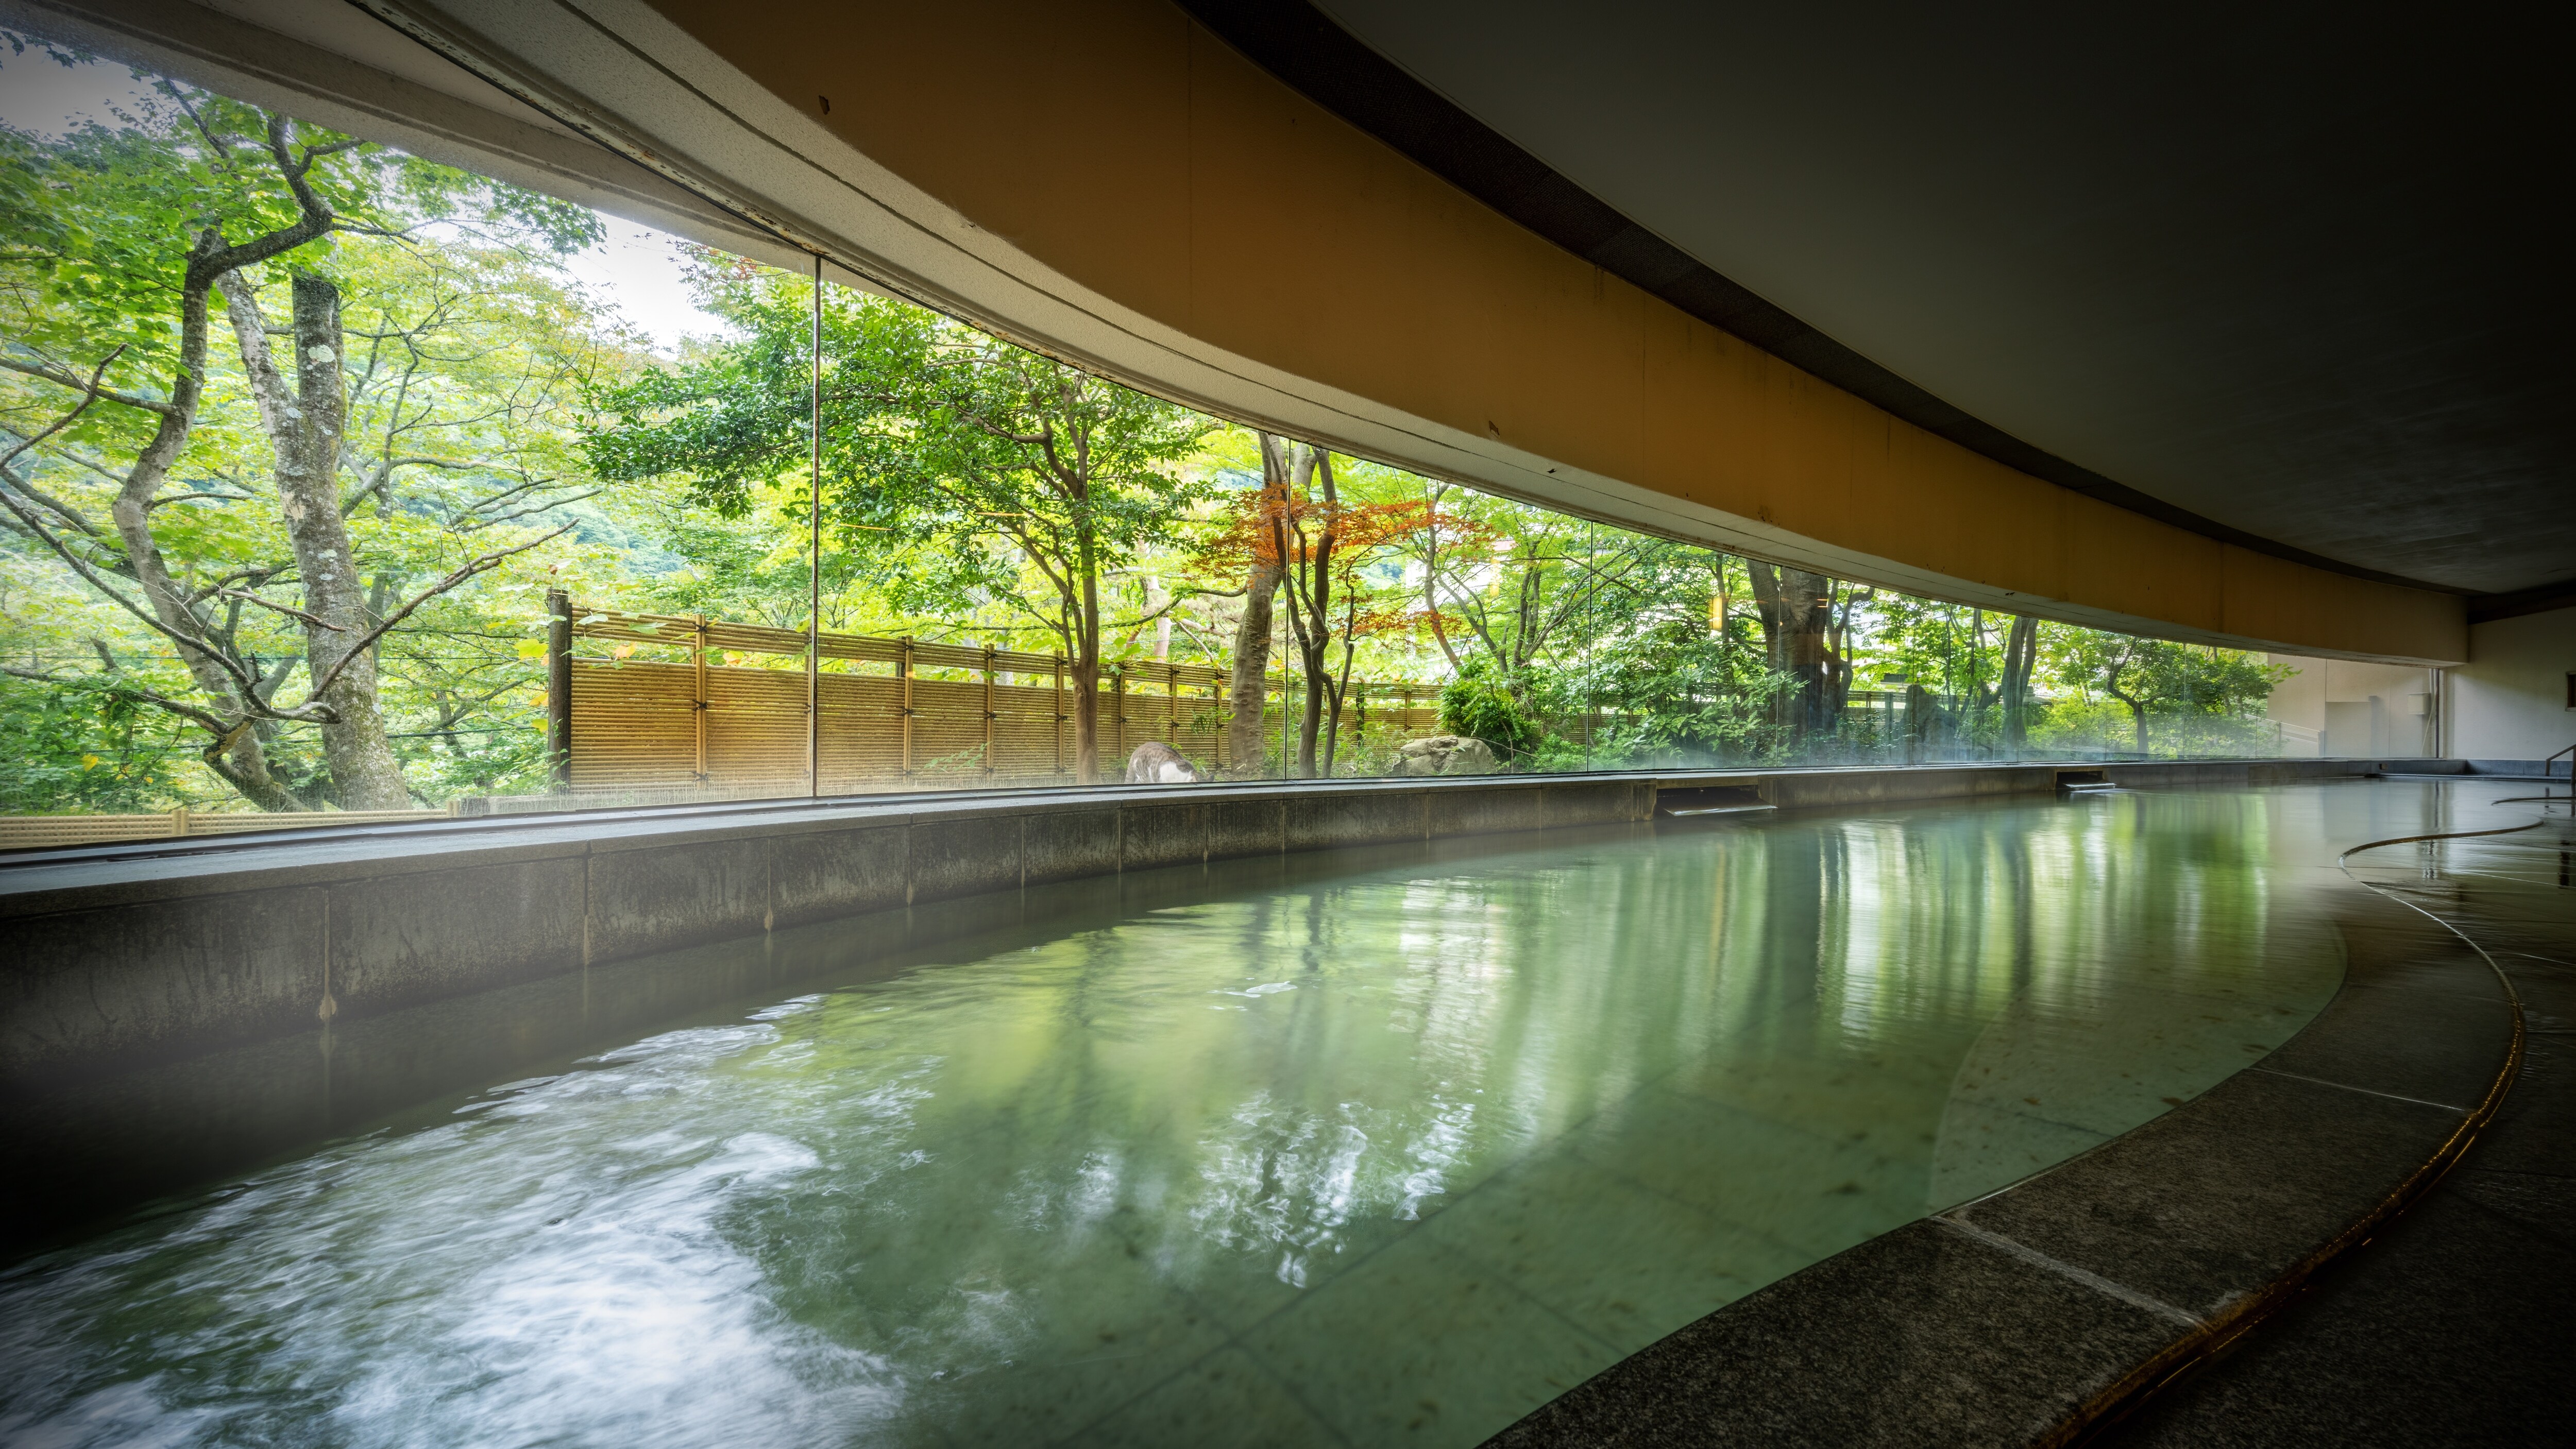 [Mountain stream observation bath] Enjoy the bath while watching the scenery of the four seasons in spring, summer, autumn and winter.